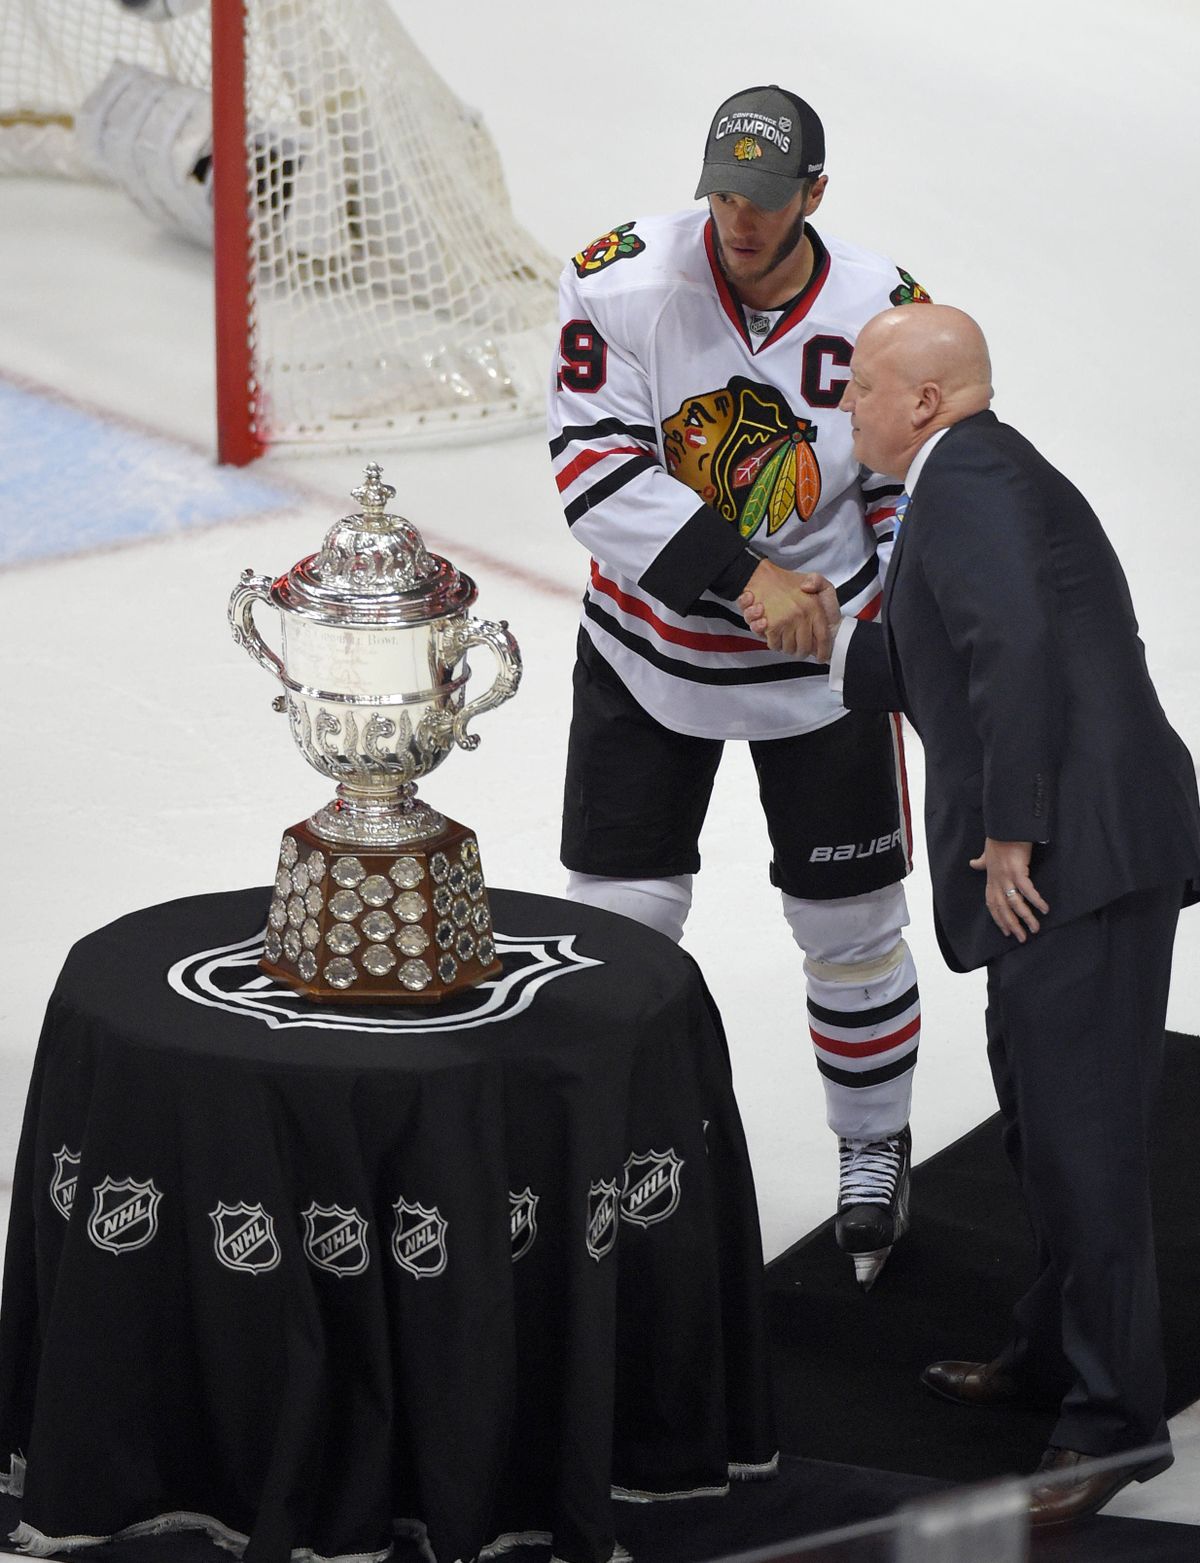 Blackhawks center and captain Jonathan Toews and his teammates have grown accustomed to receiving trophies, including their latest for winning the Western Conference. (Associated Press)